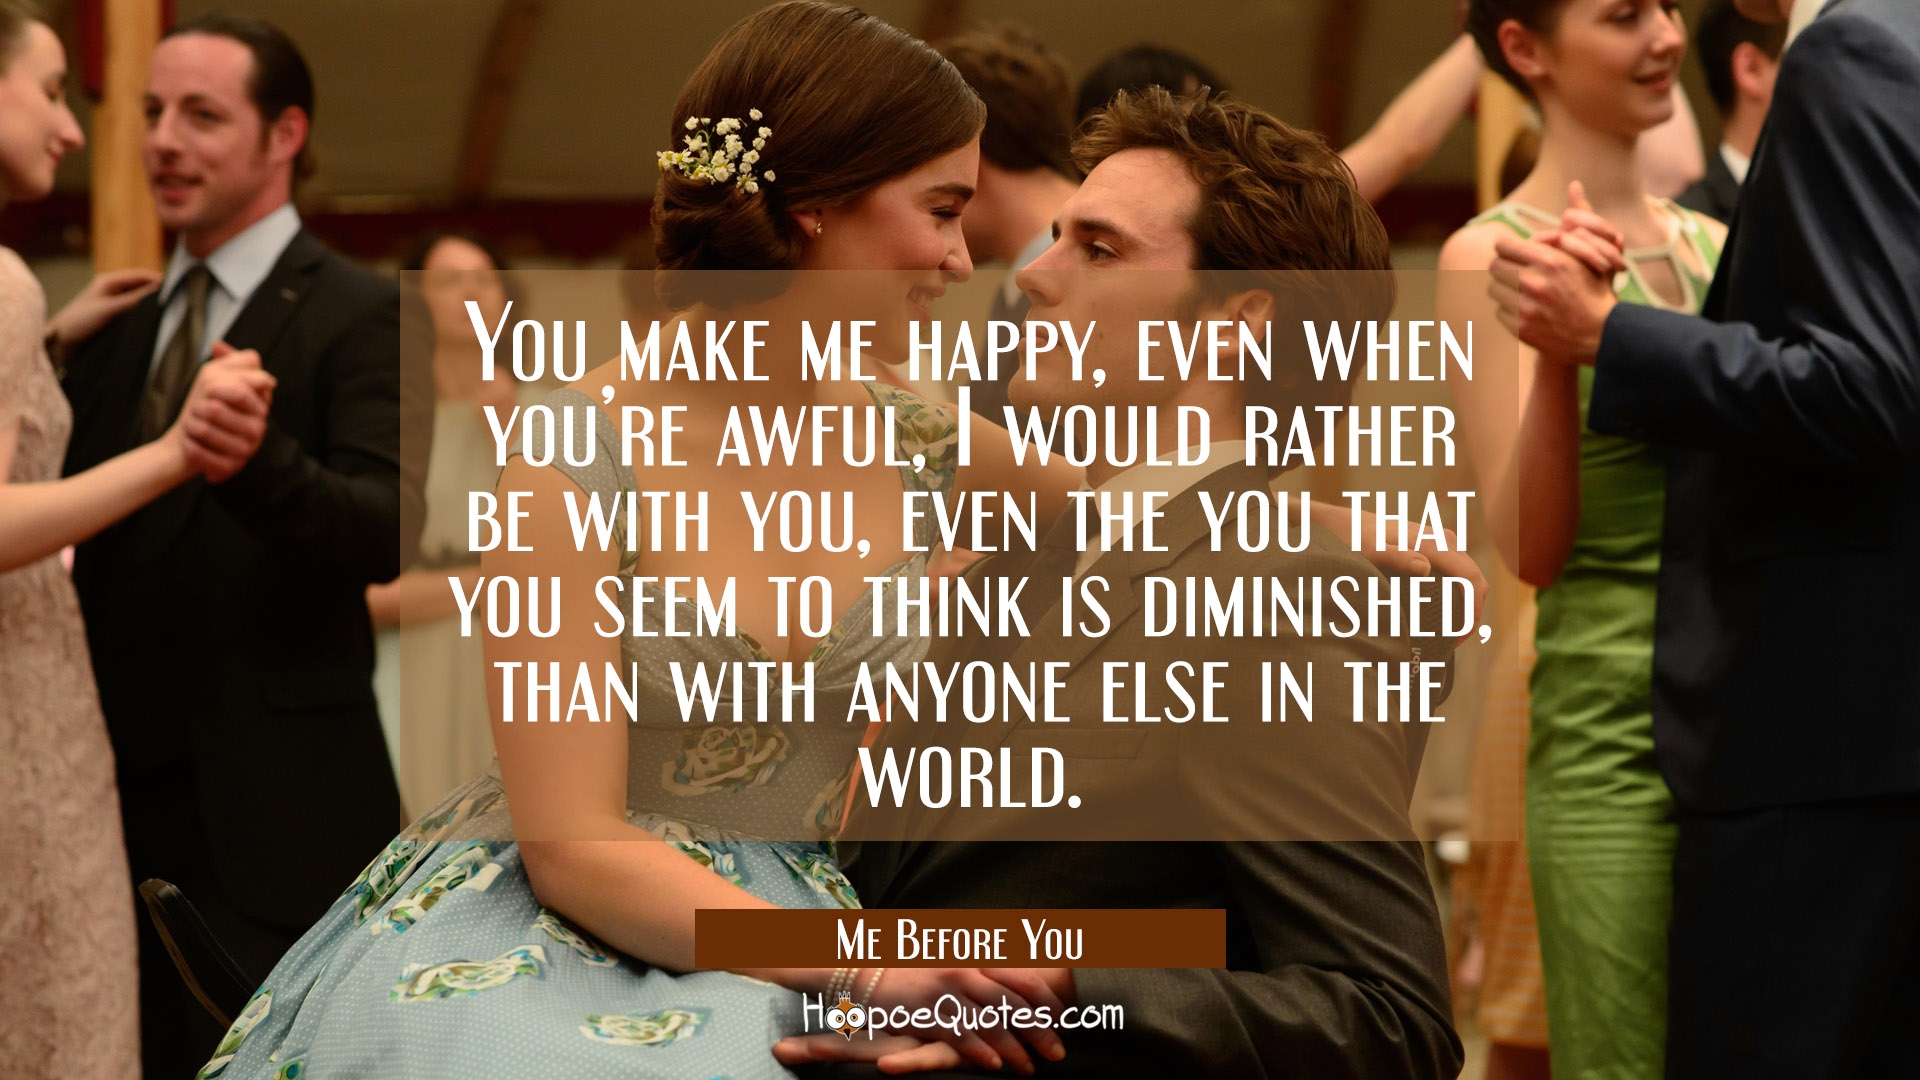 Quotes From Me Before You Movie